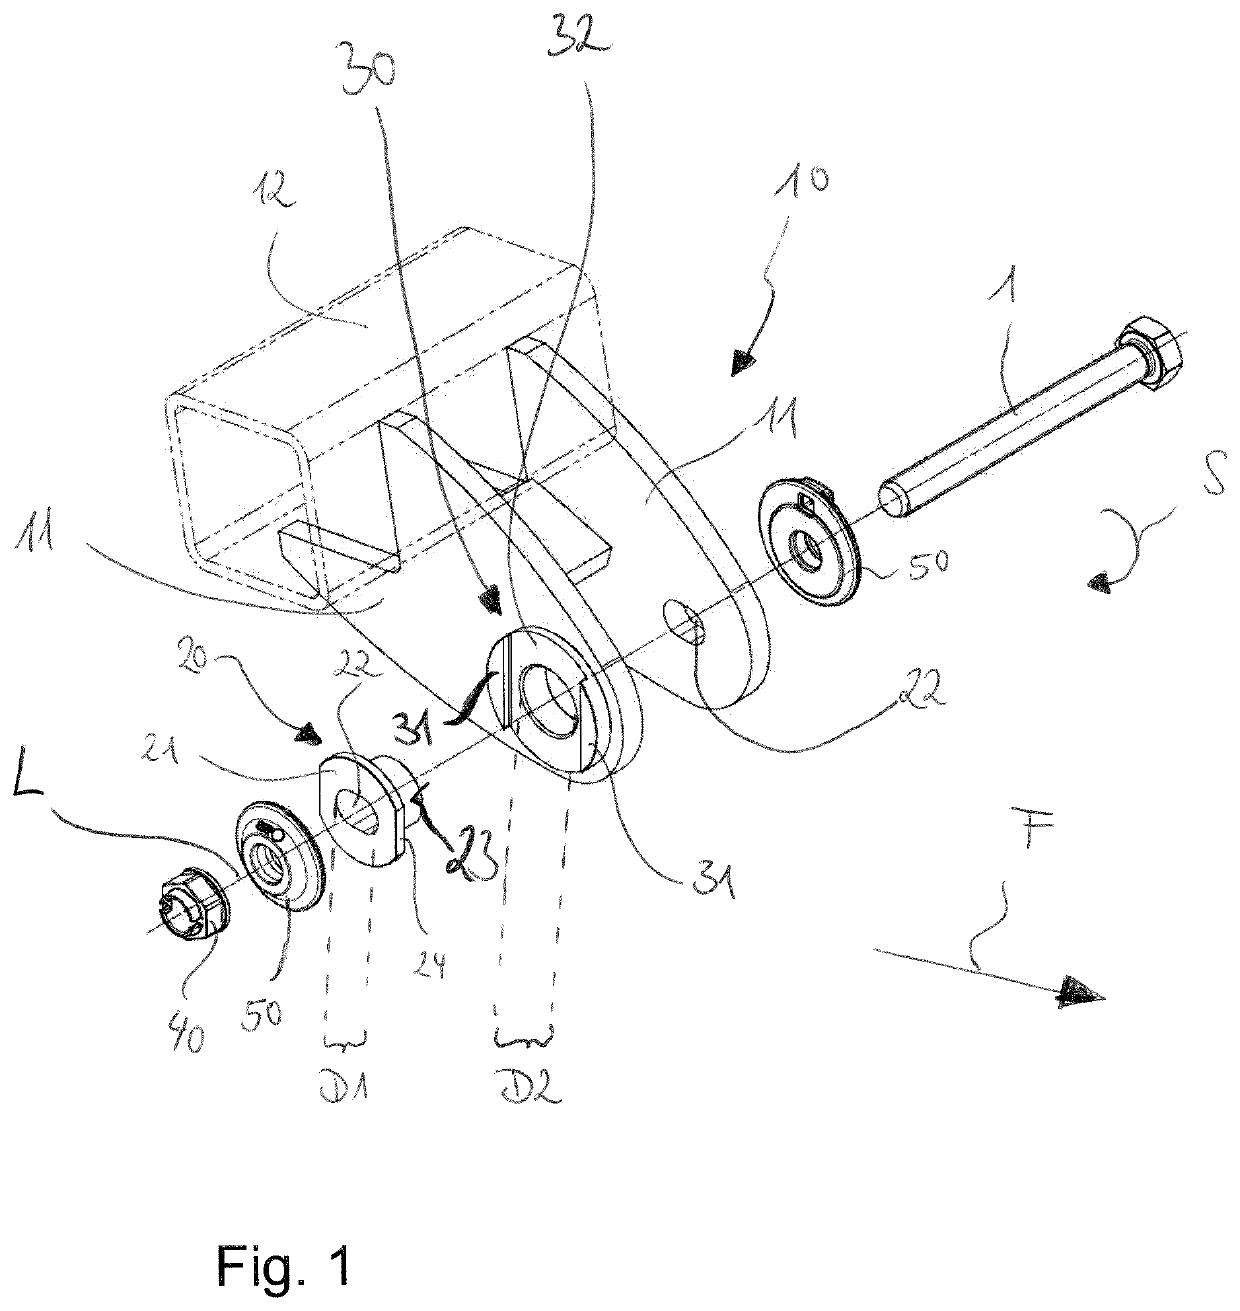 System for securing a pivoting bolt to a vehicle frame, vehicle frame for connecting a pivoting bolt and method for mounting a pivoting bolt to a vehicle frame